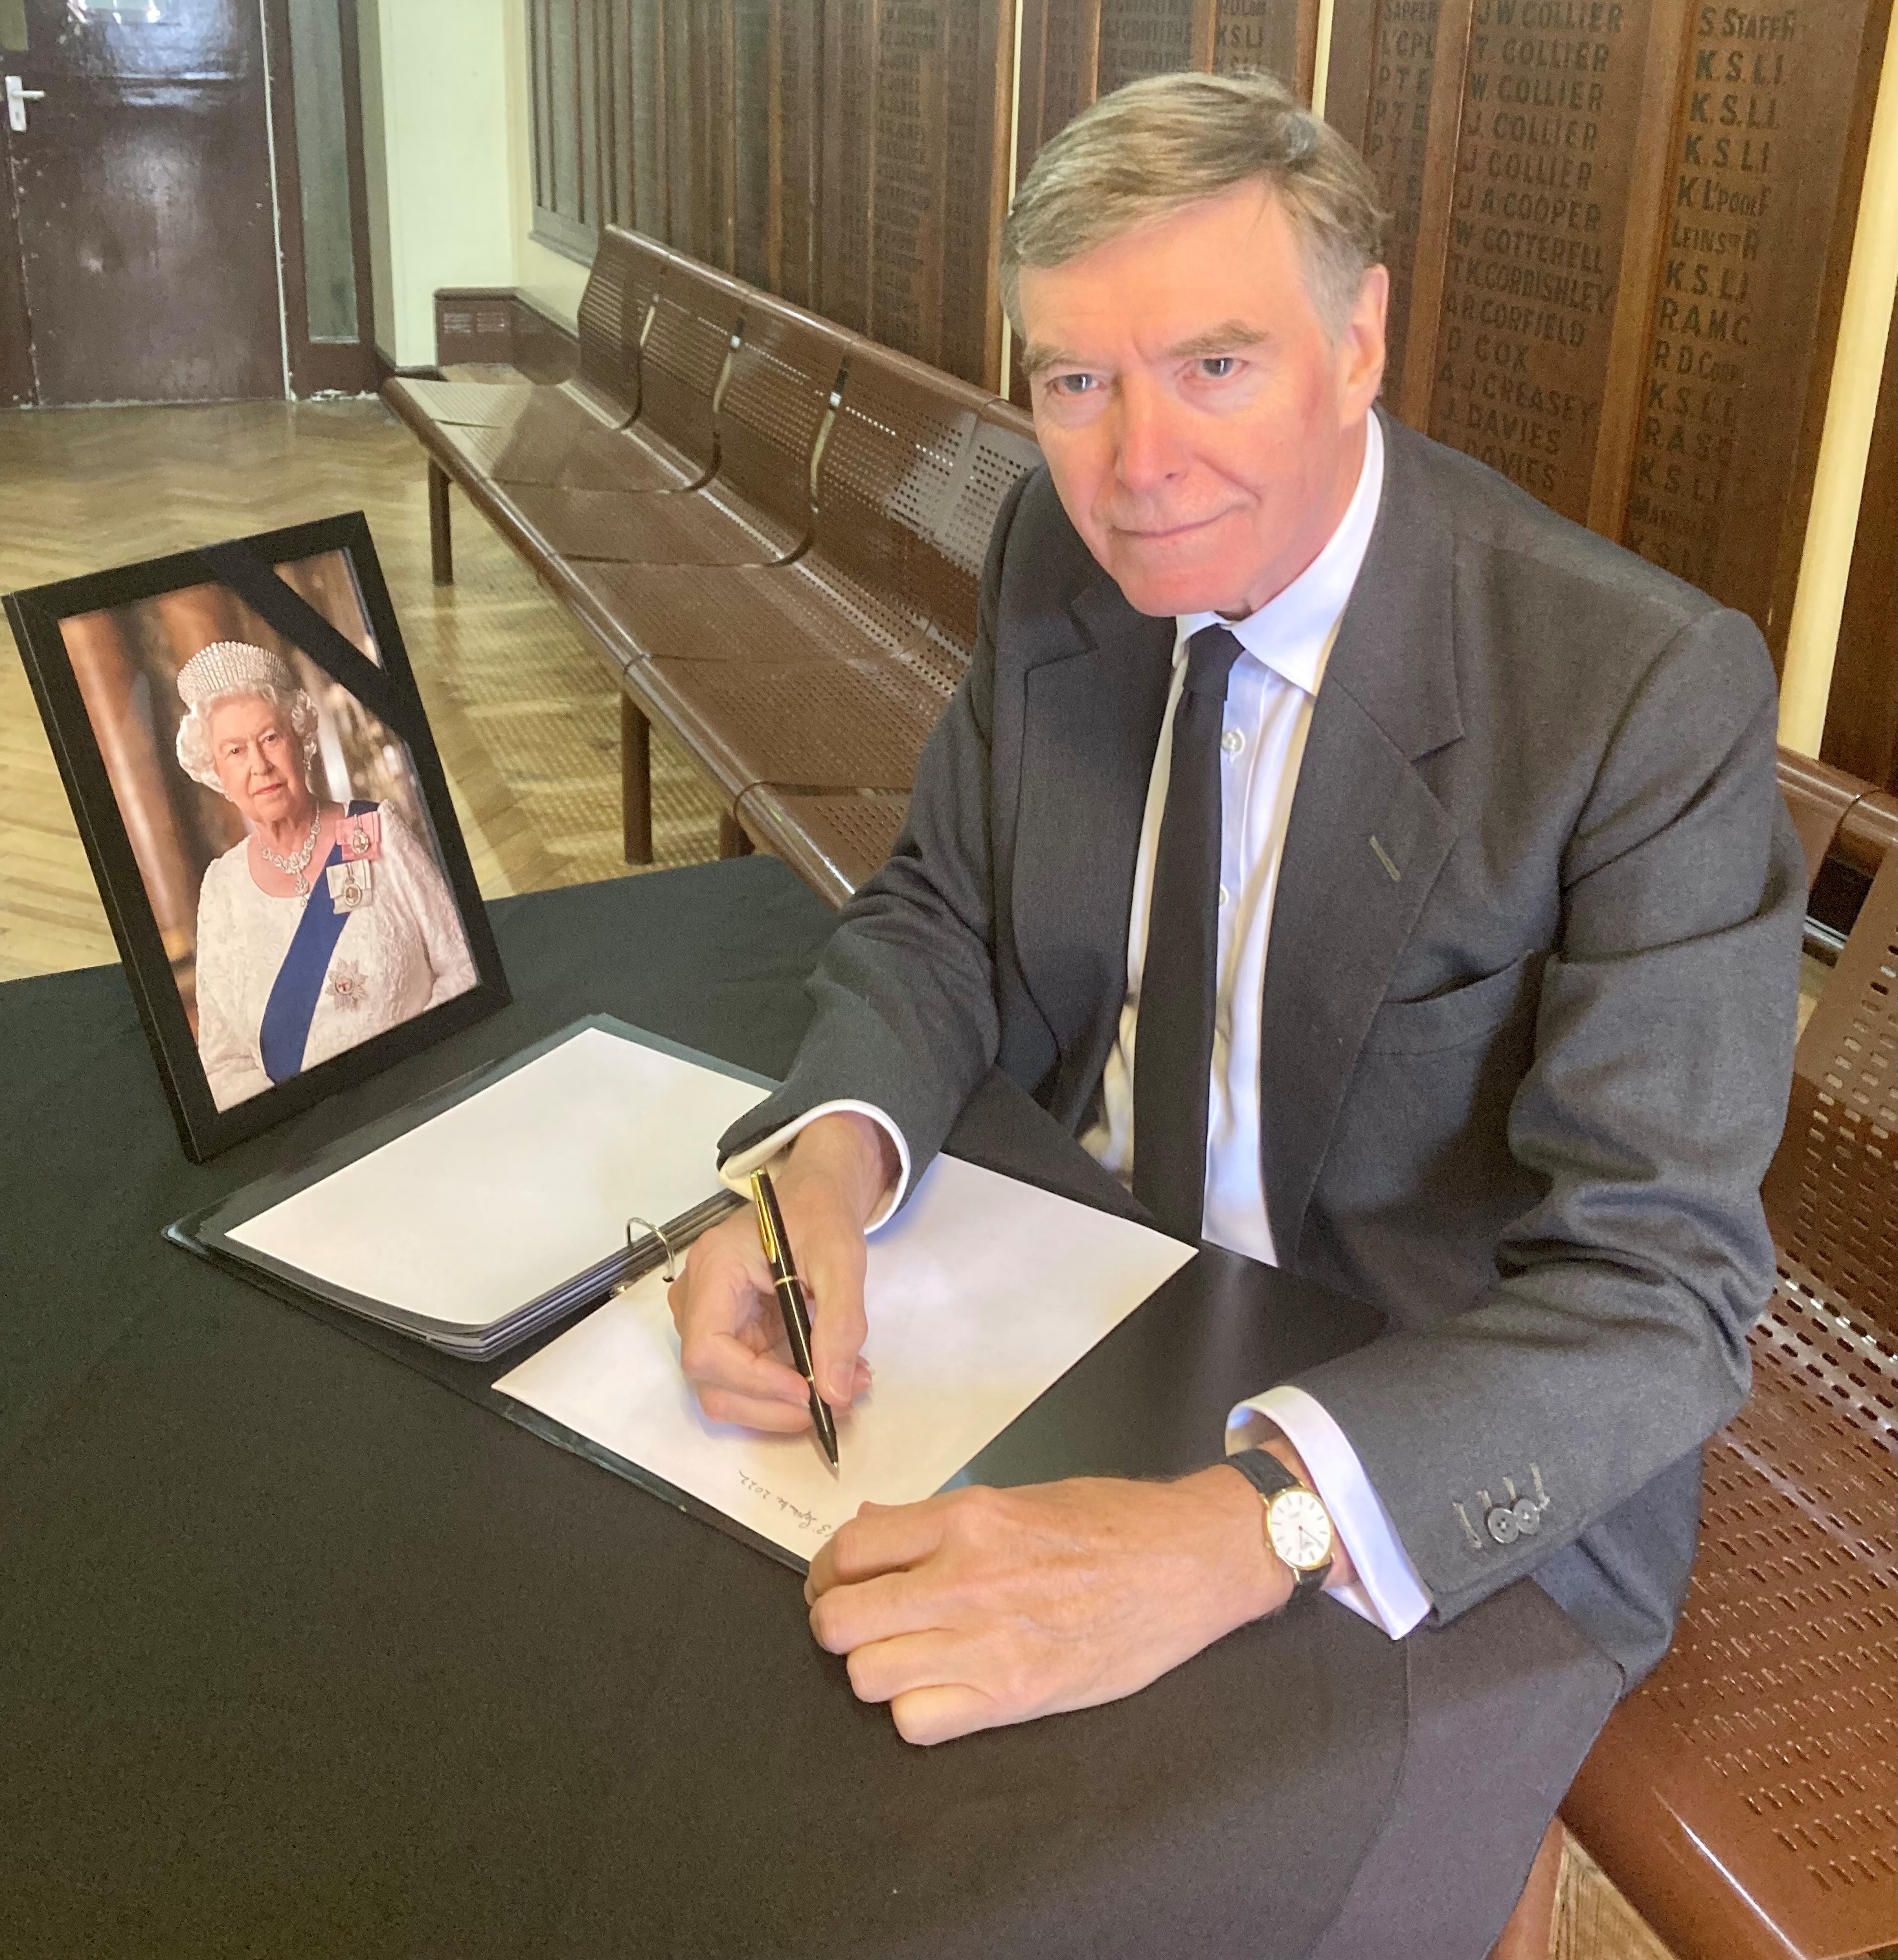 Our Mp signs the book of condolences